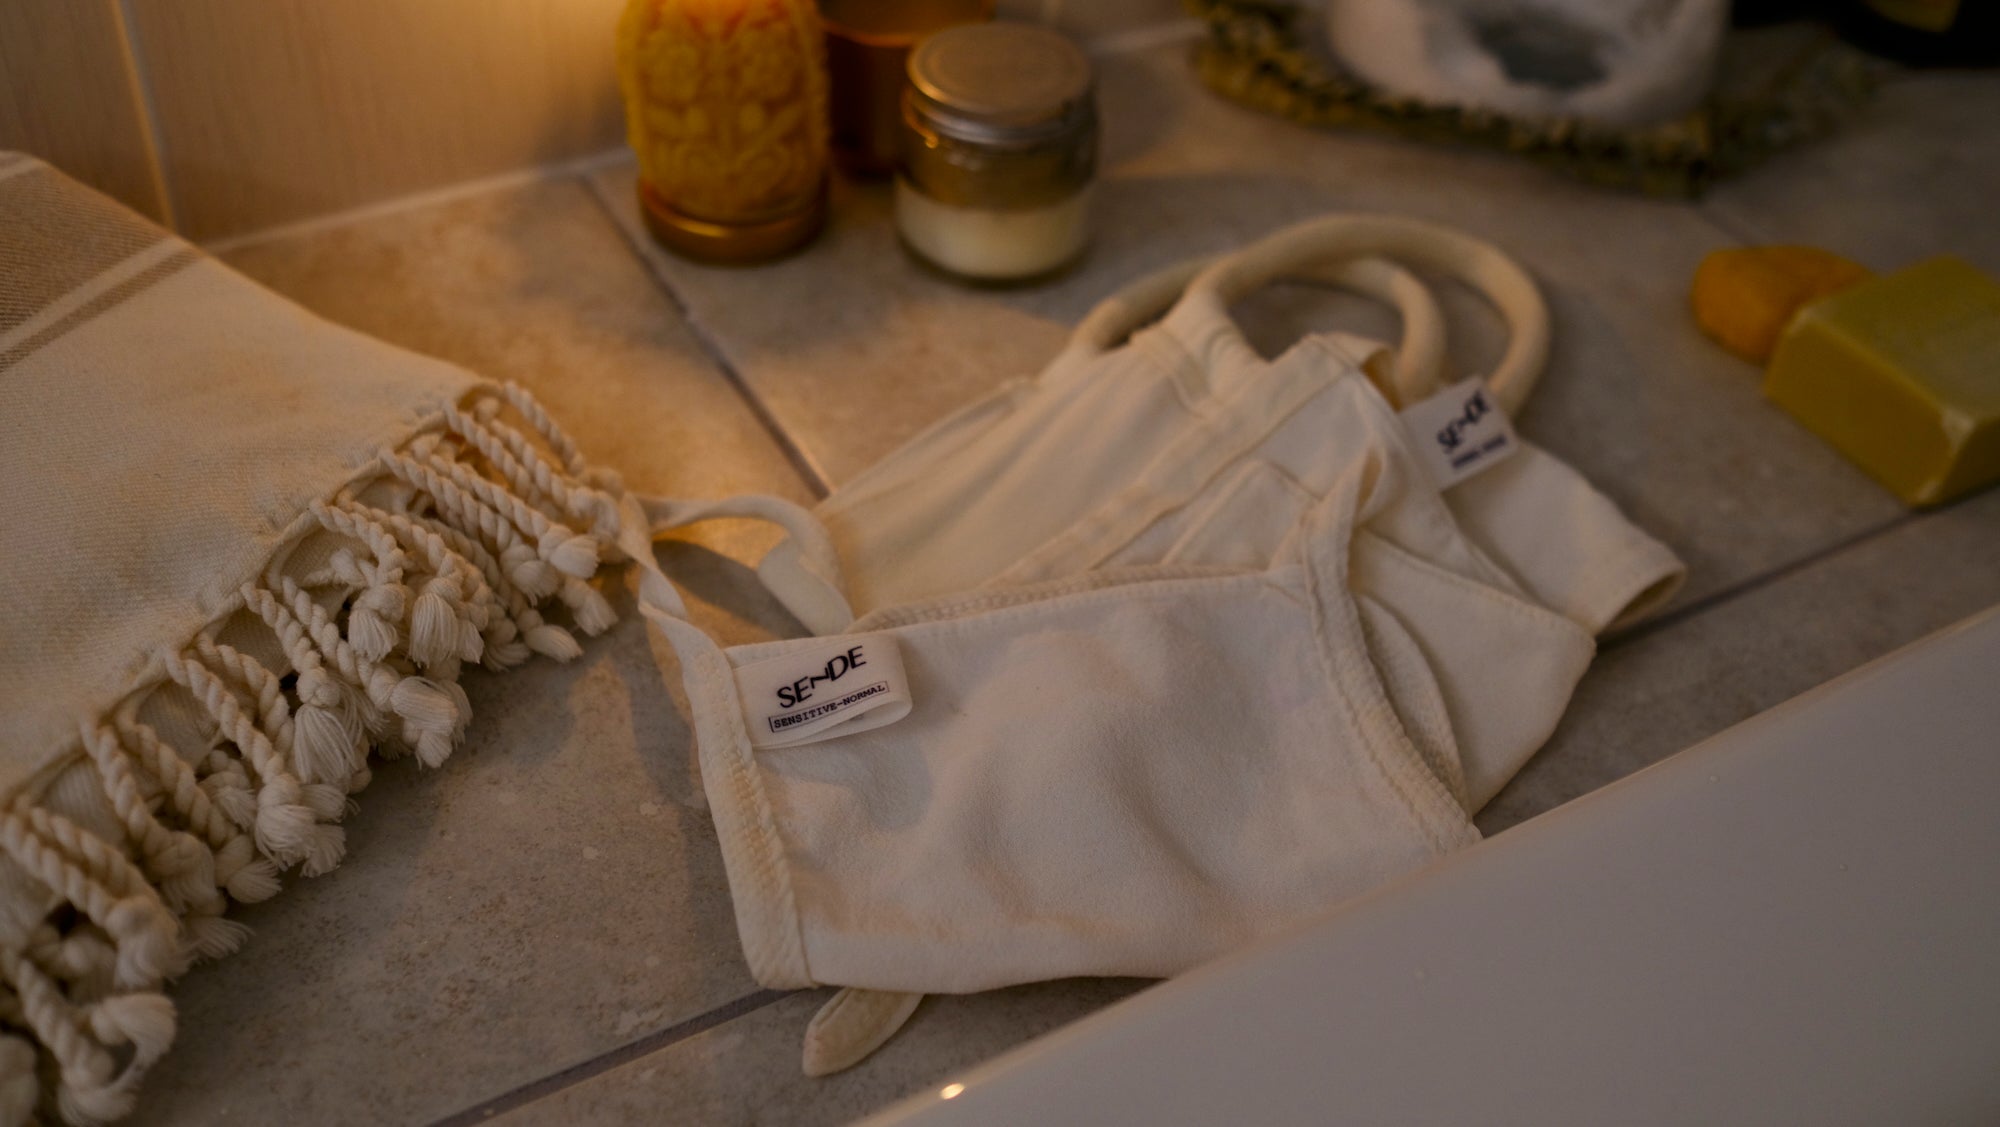 SENDE deep body exfoliating keses by a moody candle-lit bath setup with a Turkish towel, soap and konjac sponge